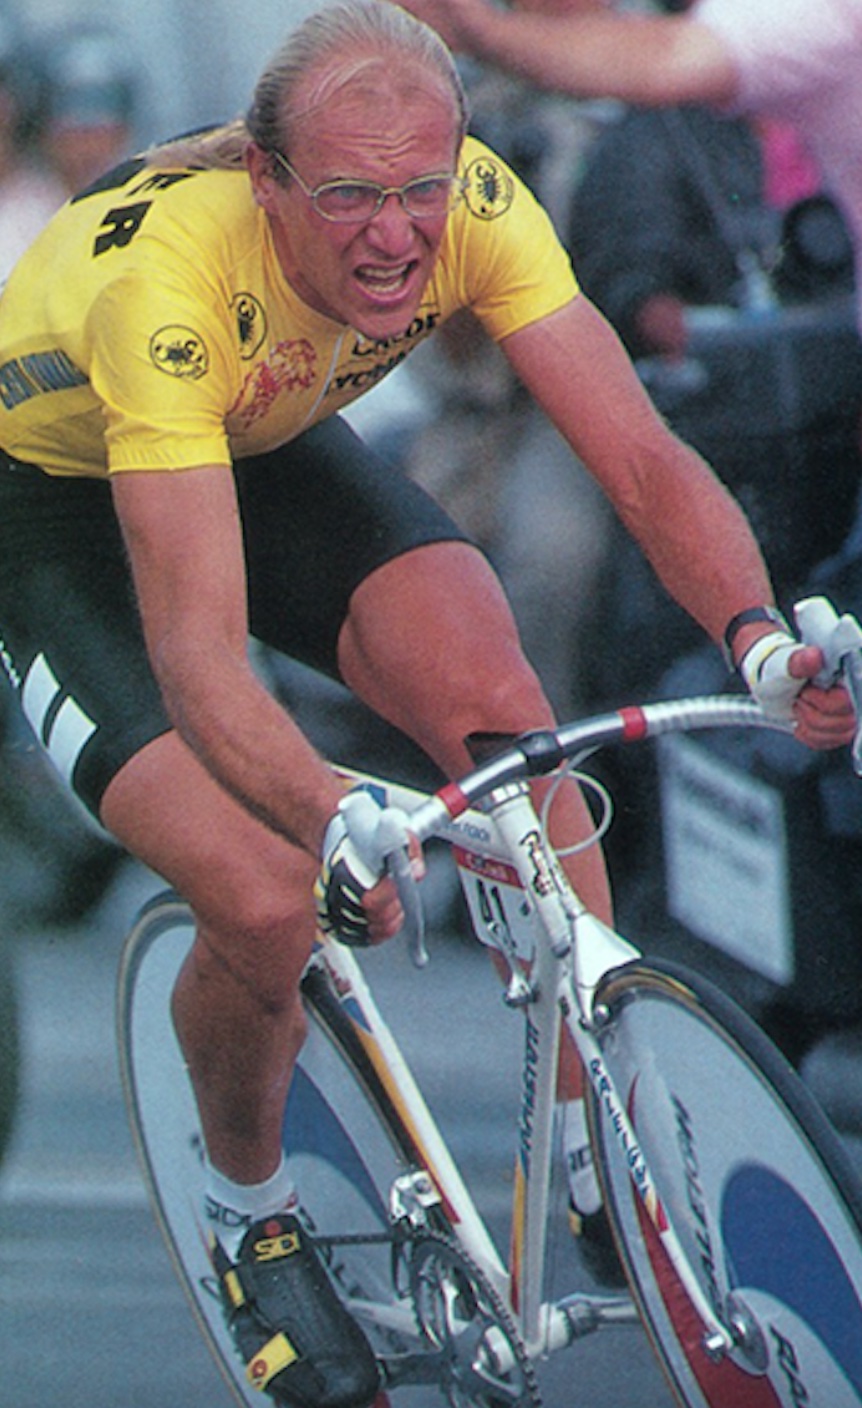 A man riding a bike in front of a crowd.